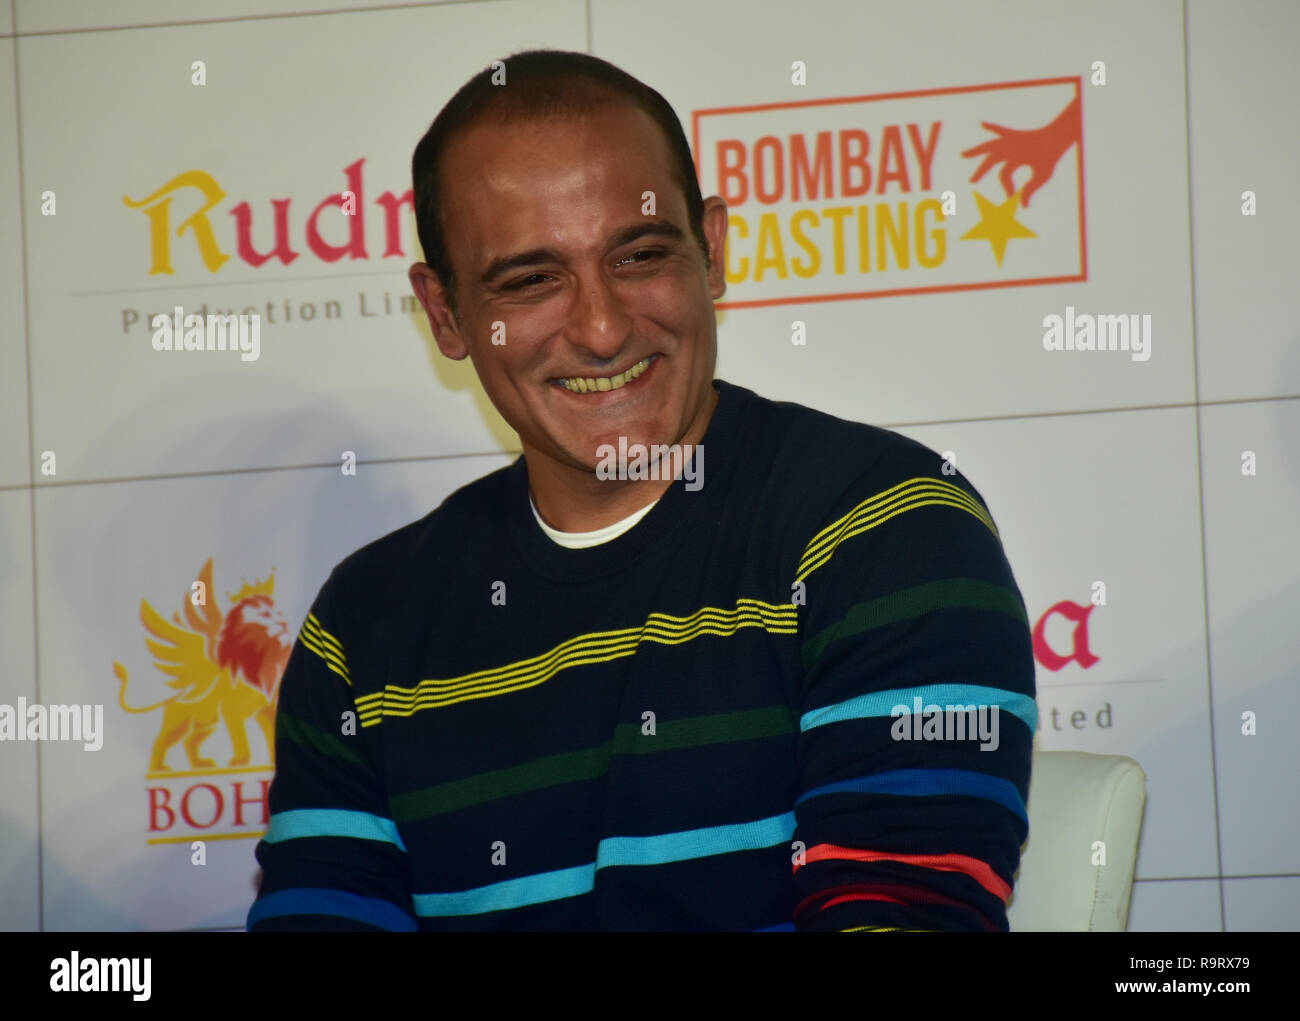 Actor Akshaye Khanna, seen during the trailer launch of upcoming Political Drama film 'The Accidental Prime Minister' at PVR, Juhu in Mumbai. The film is based on the eponymous book by former Prime Minister Dr. Manmohan Singh's media advisor Sanjaya Baru. Stock Photo